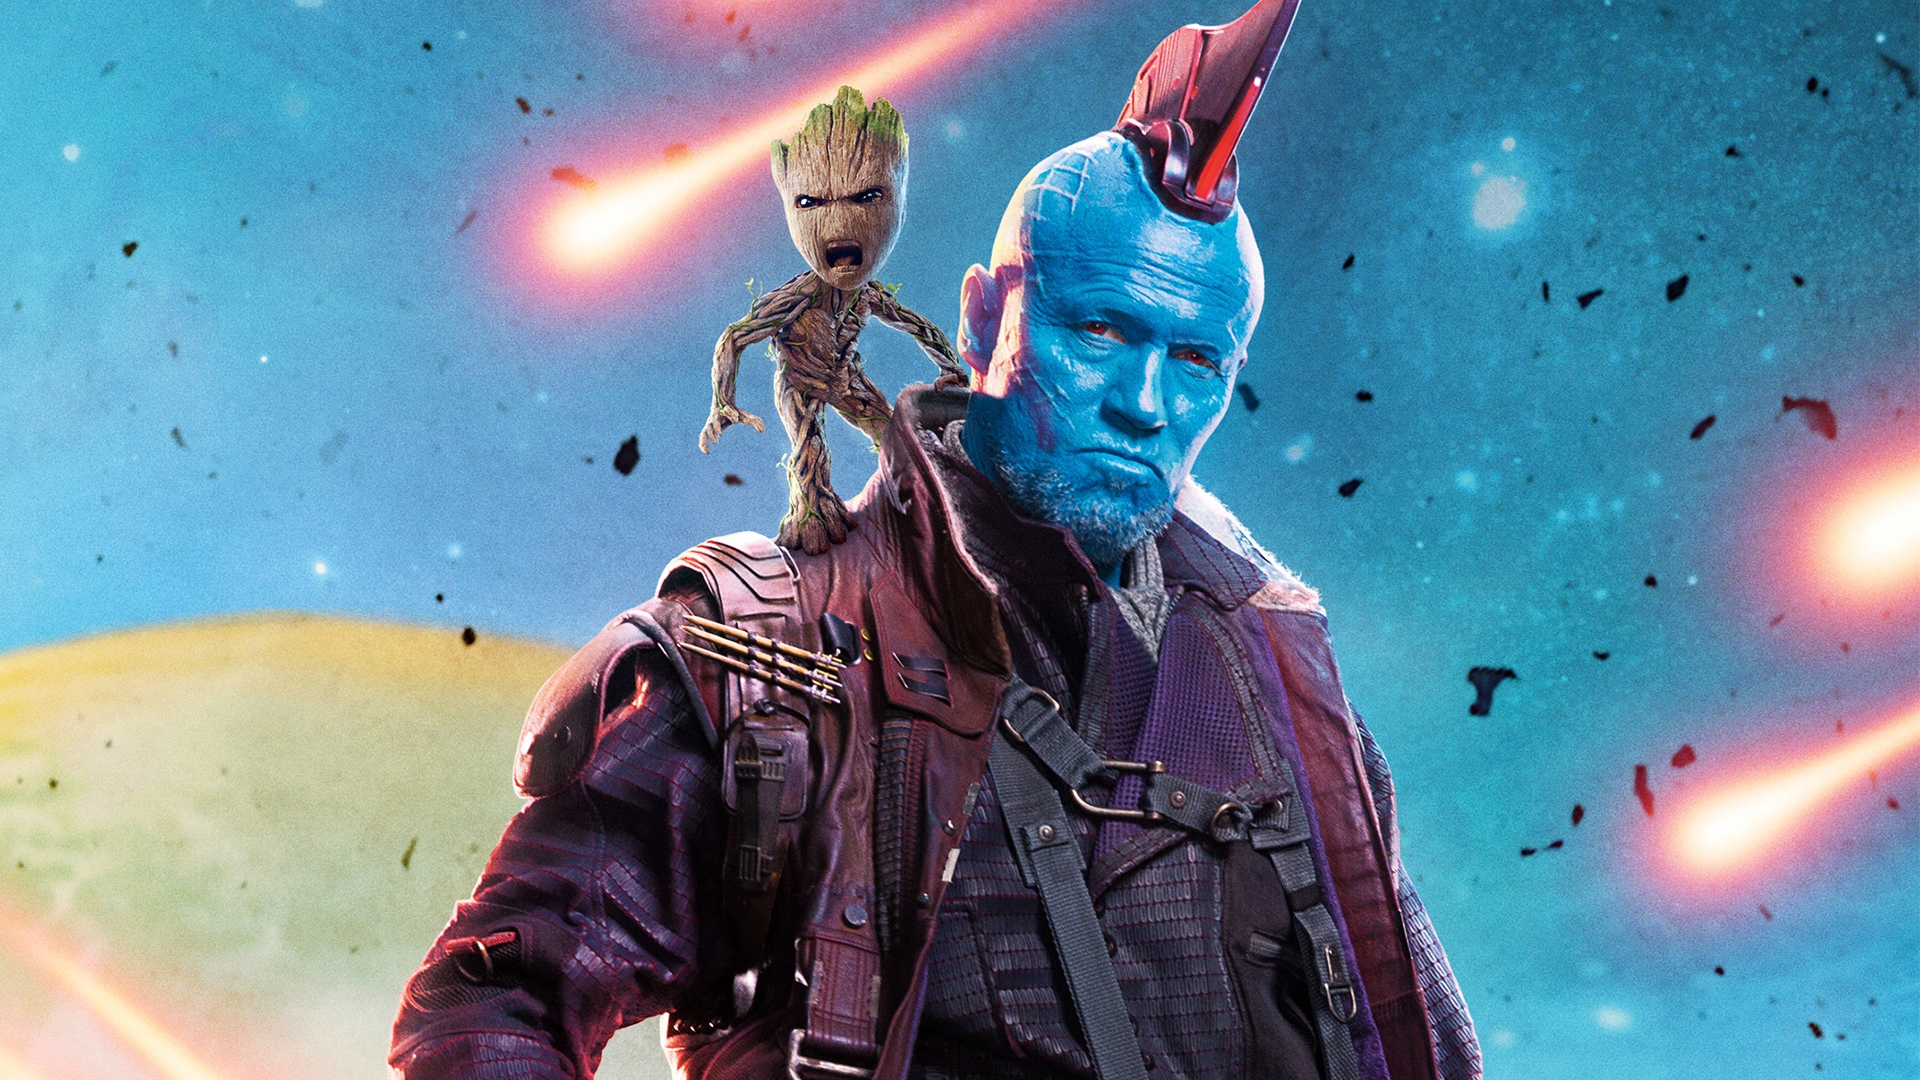 Wallpaper Guardians of the galaxy vol, 2, 2017 movie, cast, angry baby groot